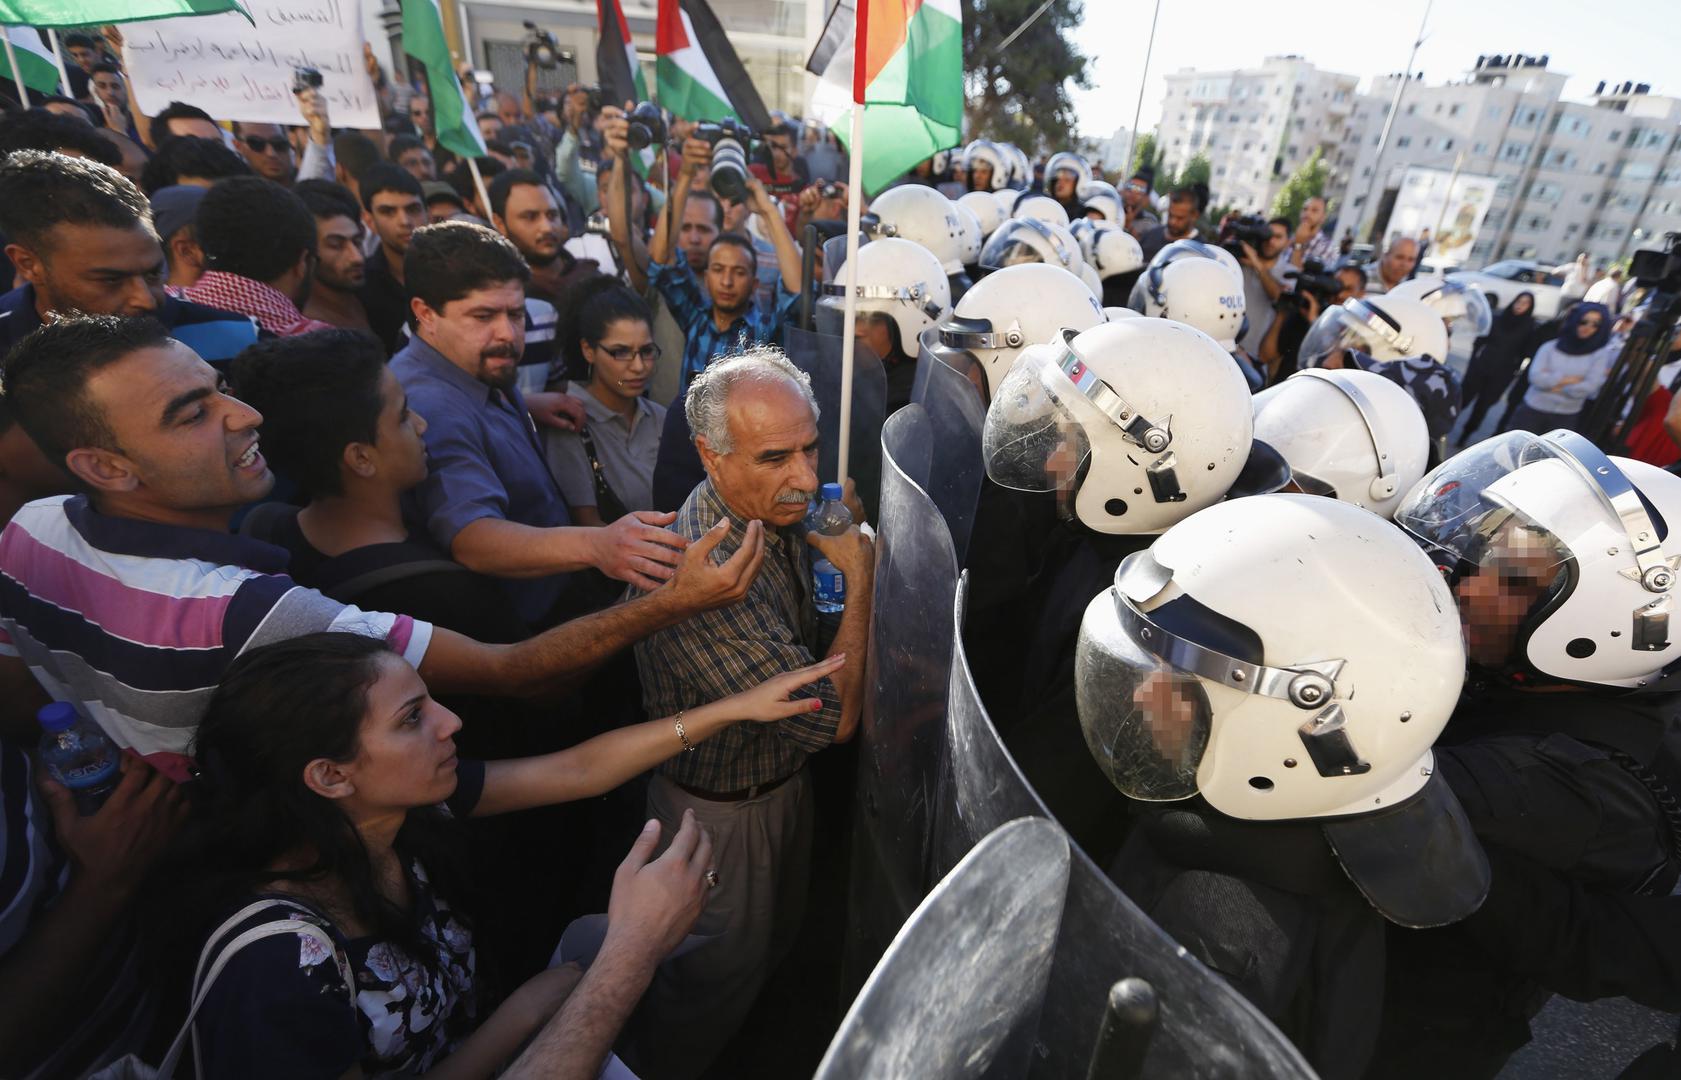 Palestinian riot police confront demonstrators protesting security coordination between the Palestinian Authority (PA) and Israel, in the West Bank city of Ramallah on June 23, 2014.